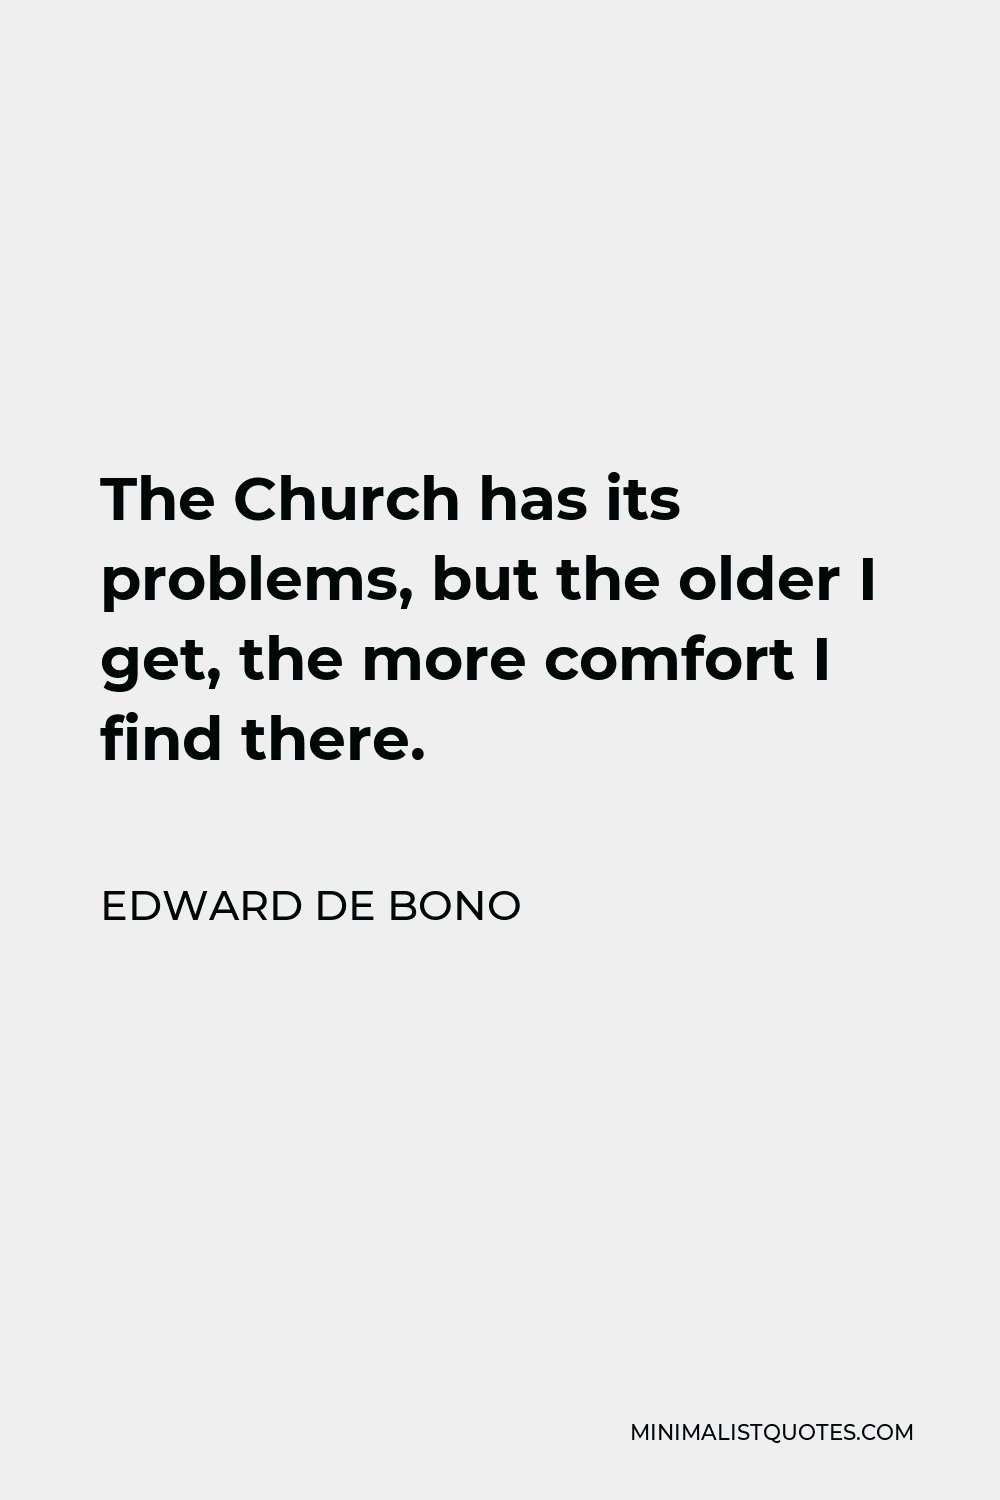 Edward de Bono Quote - The Church has its problems, but the older I get, the more comfort I find there.